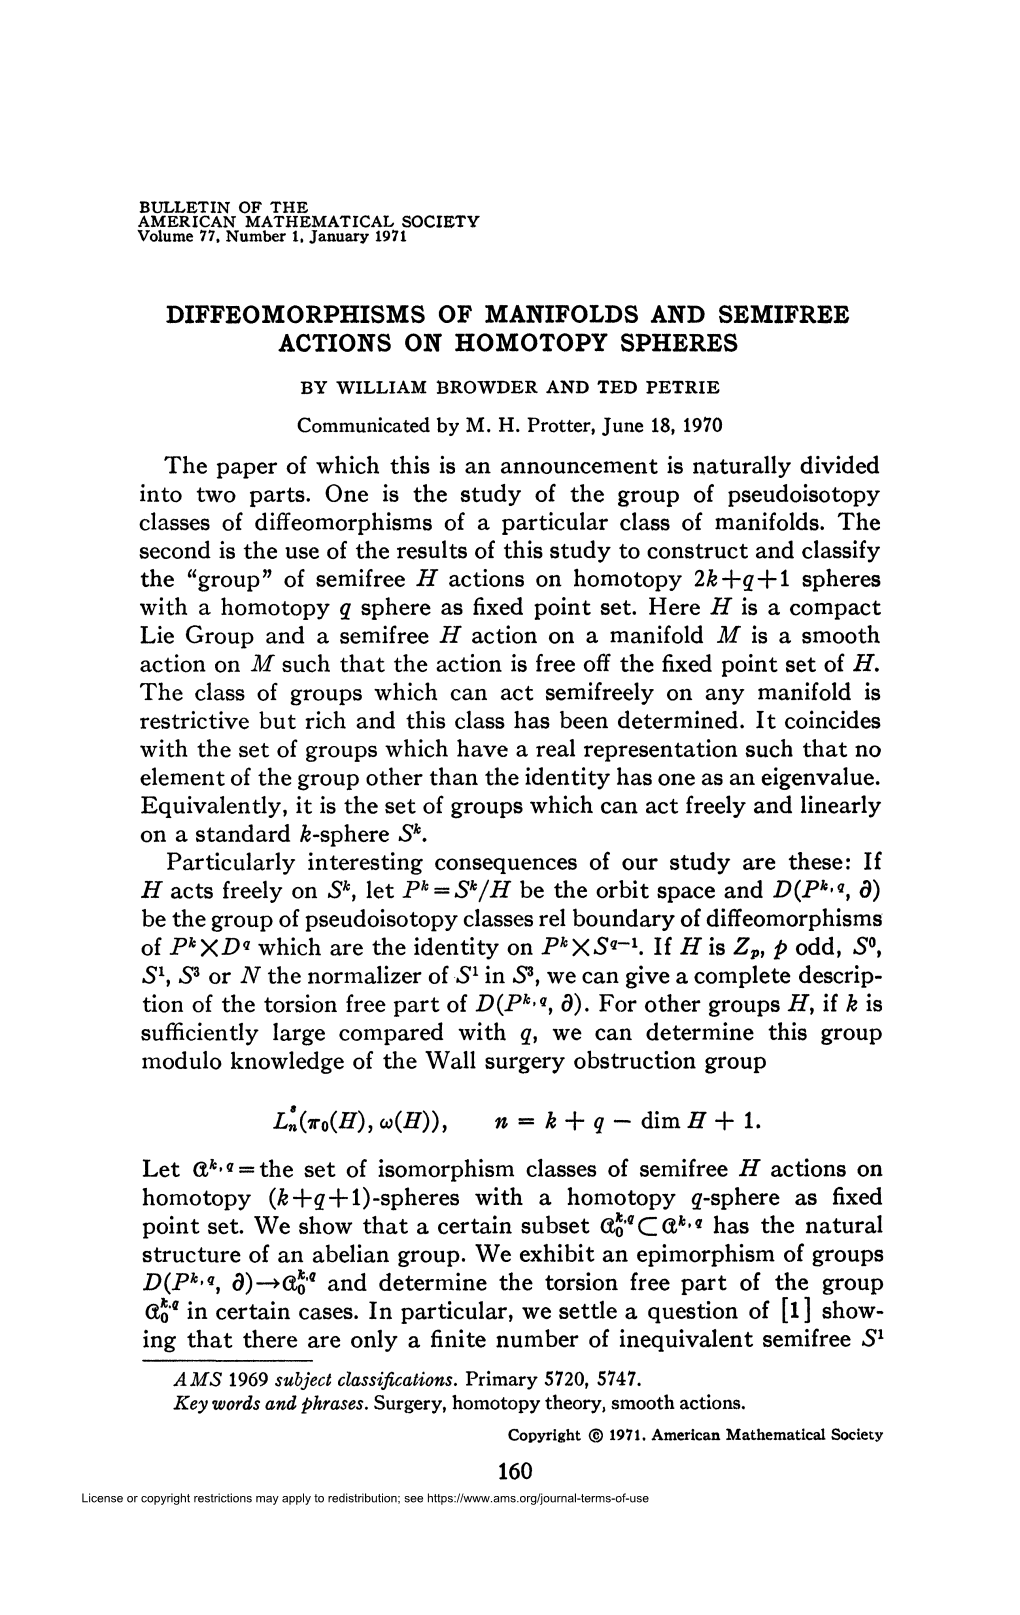 Diffeomorphisms of Manifolds and Semifree Actions on Homotopy Spheres